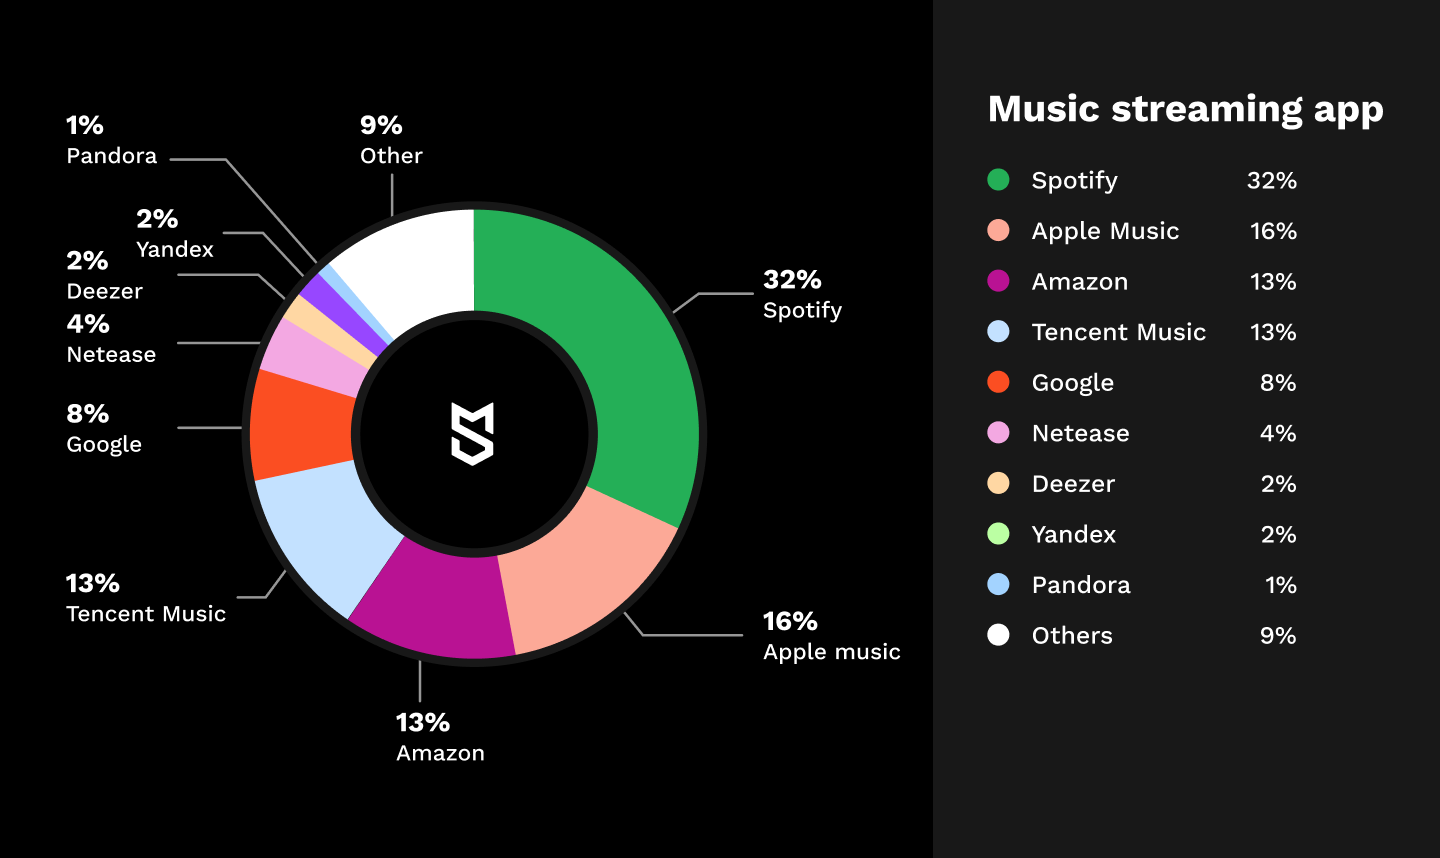 Why you should consider developing an app like Spotify